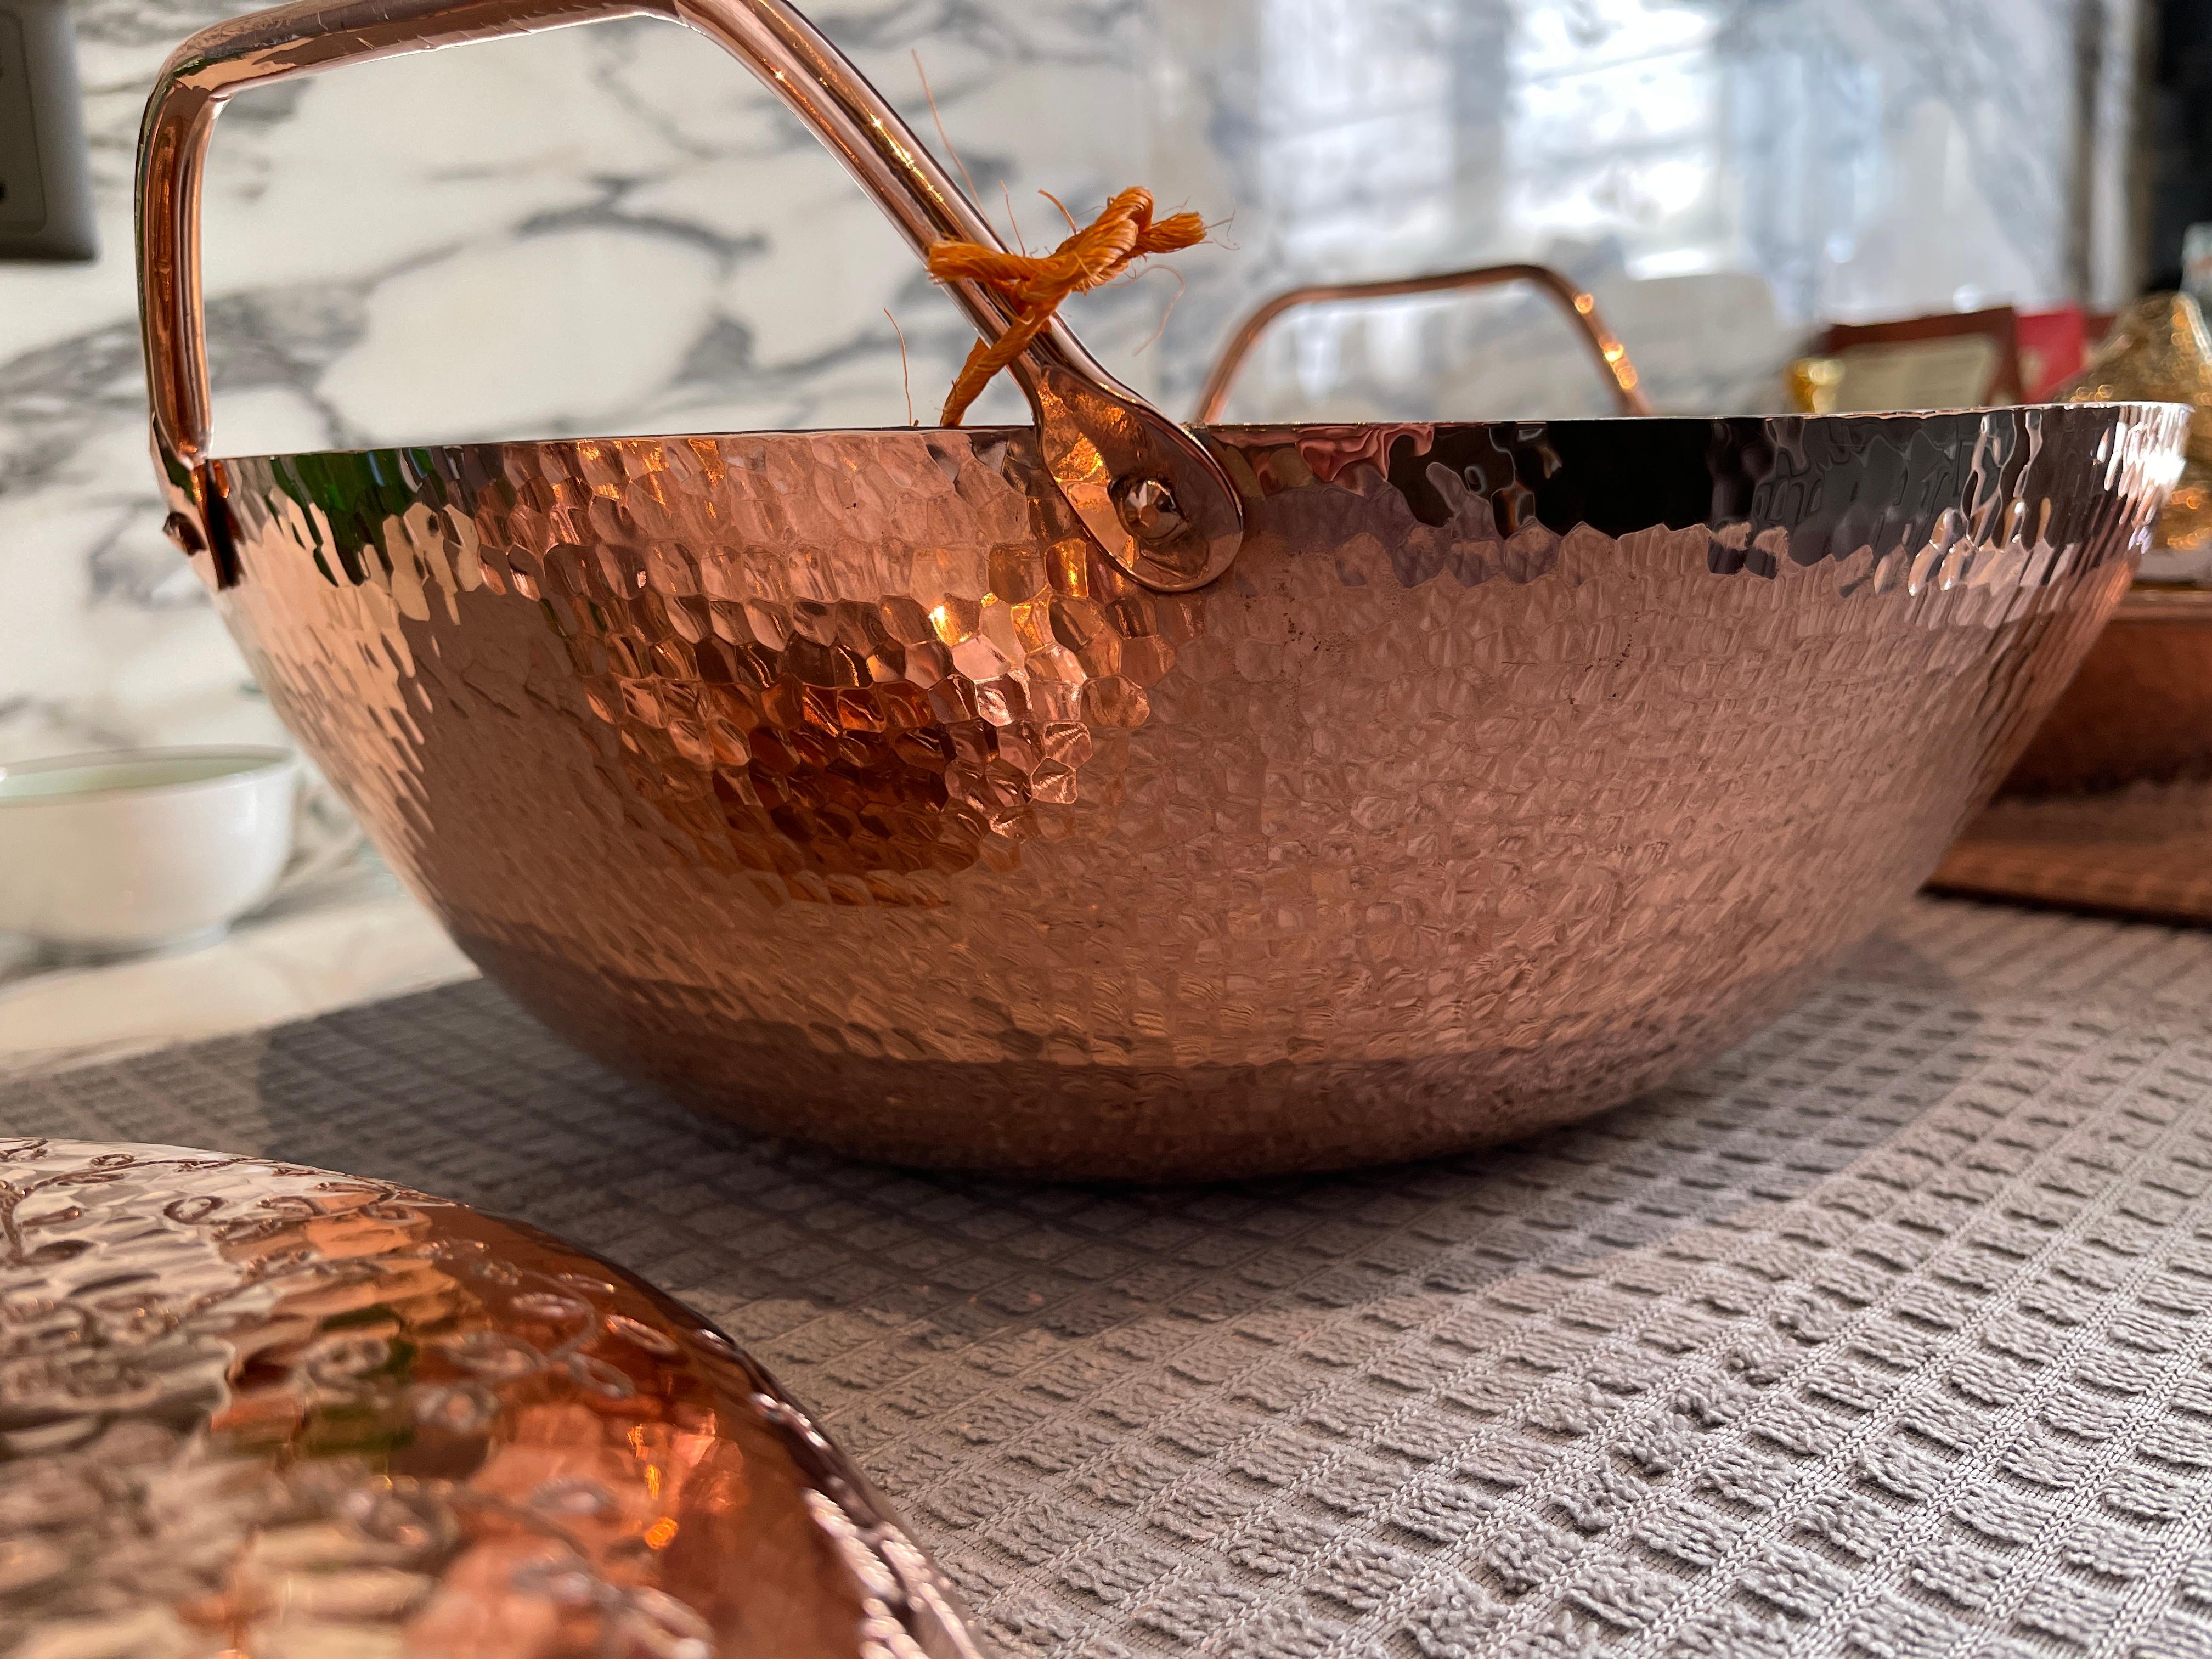 Turn the most humble dish into an elegant dining experience. Hand-hammered by talented artisans, this wok is hardworking and great looking, moving from your stovetop to oven and even tabletop with classic culinary appeal. The outside of gleaming